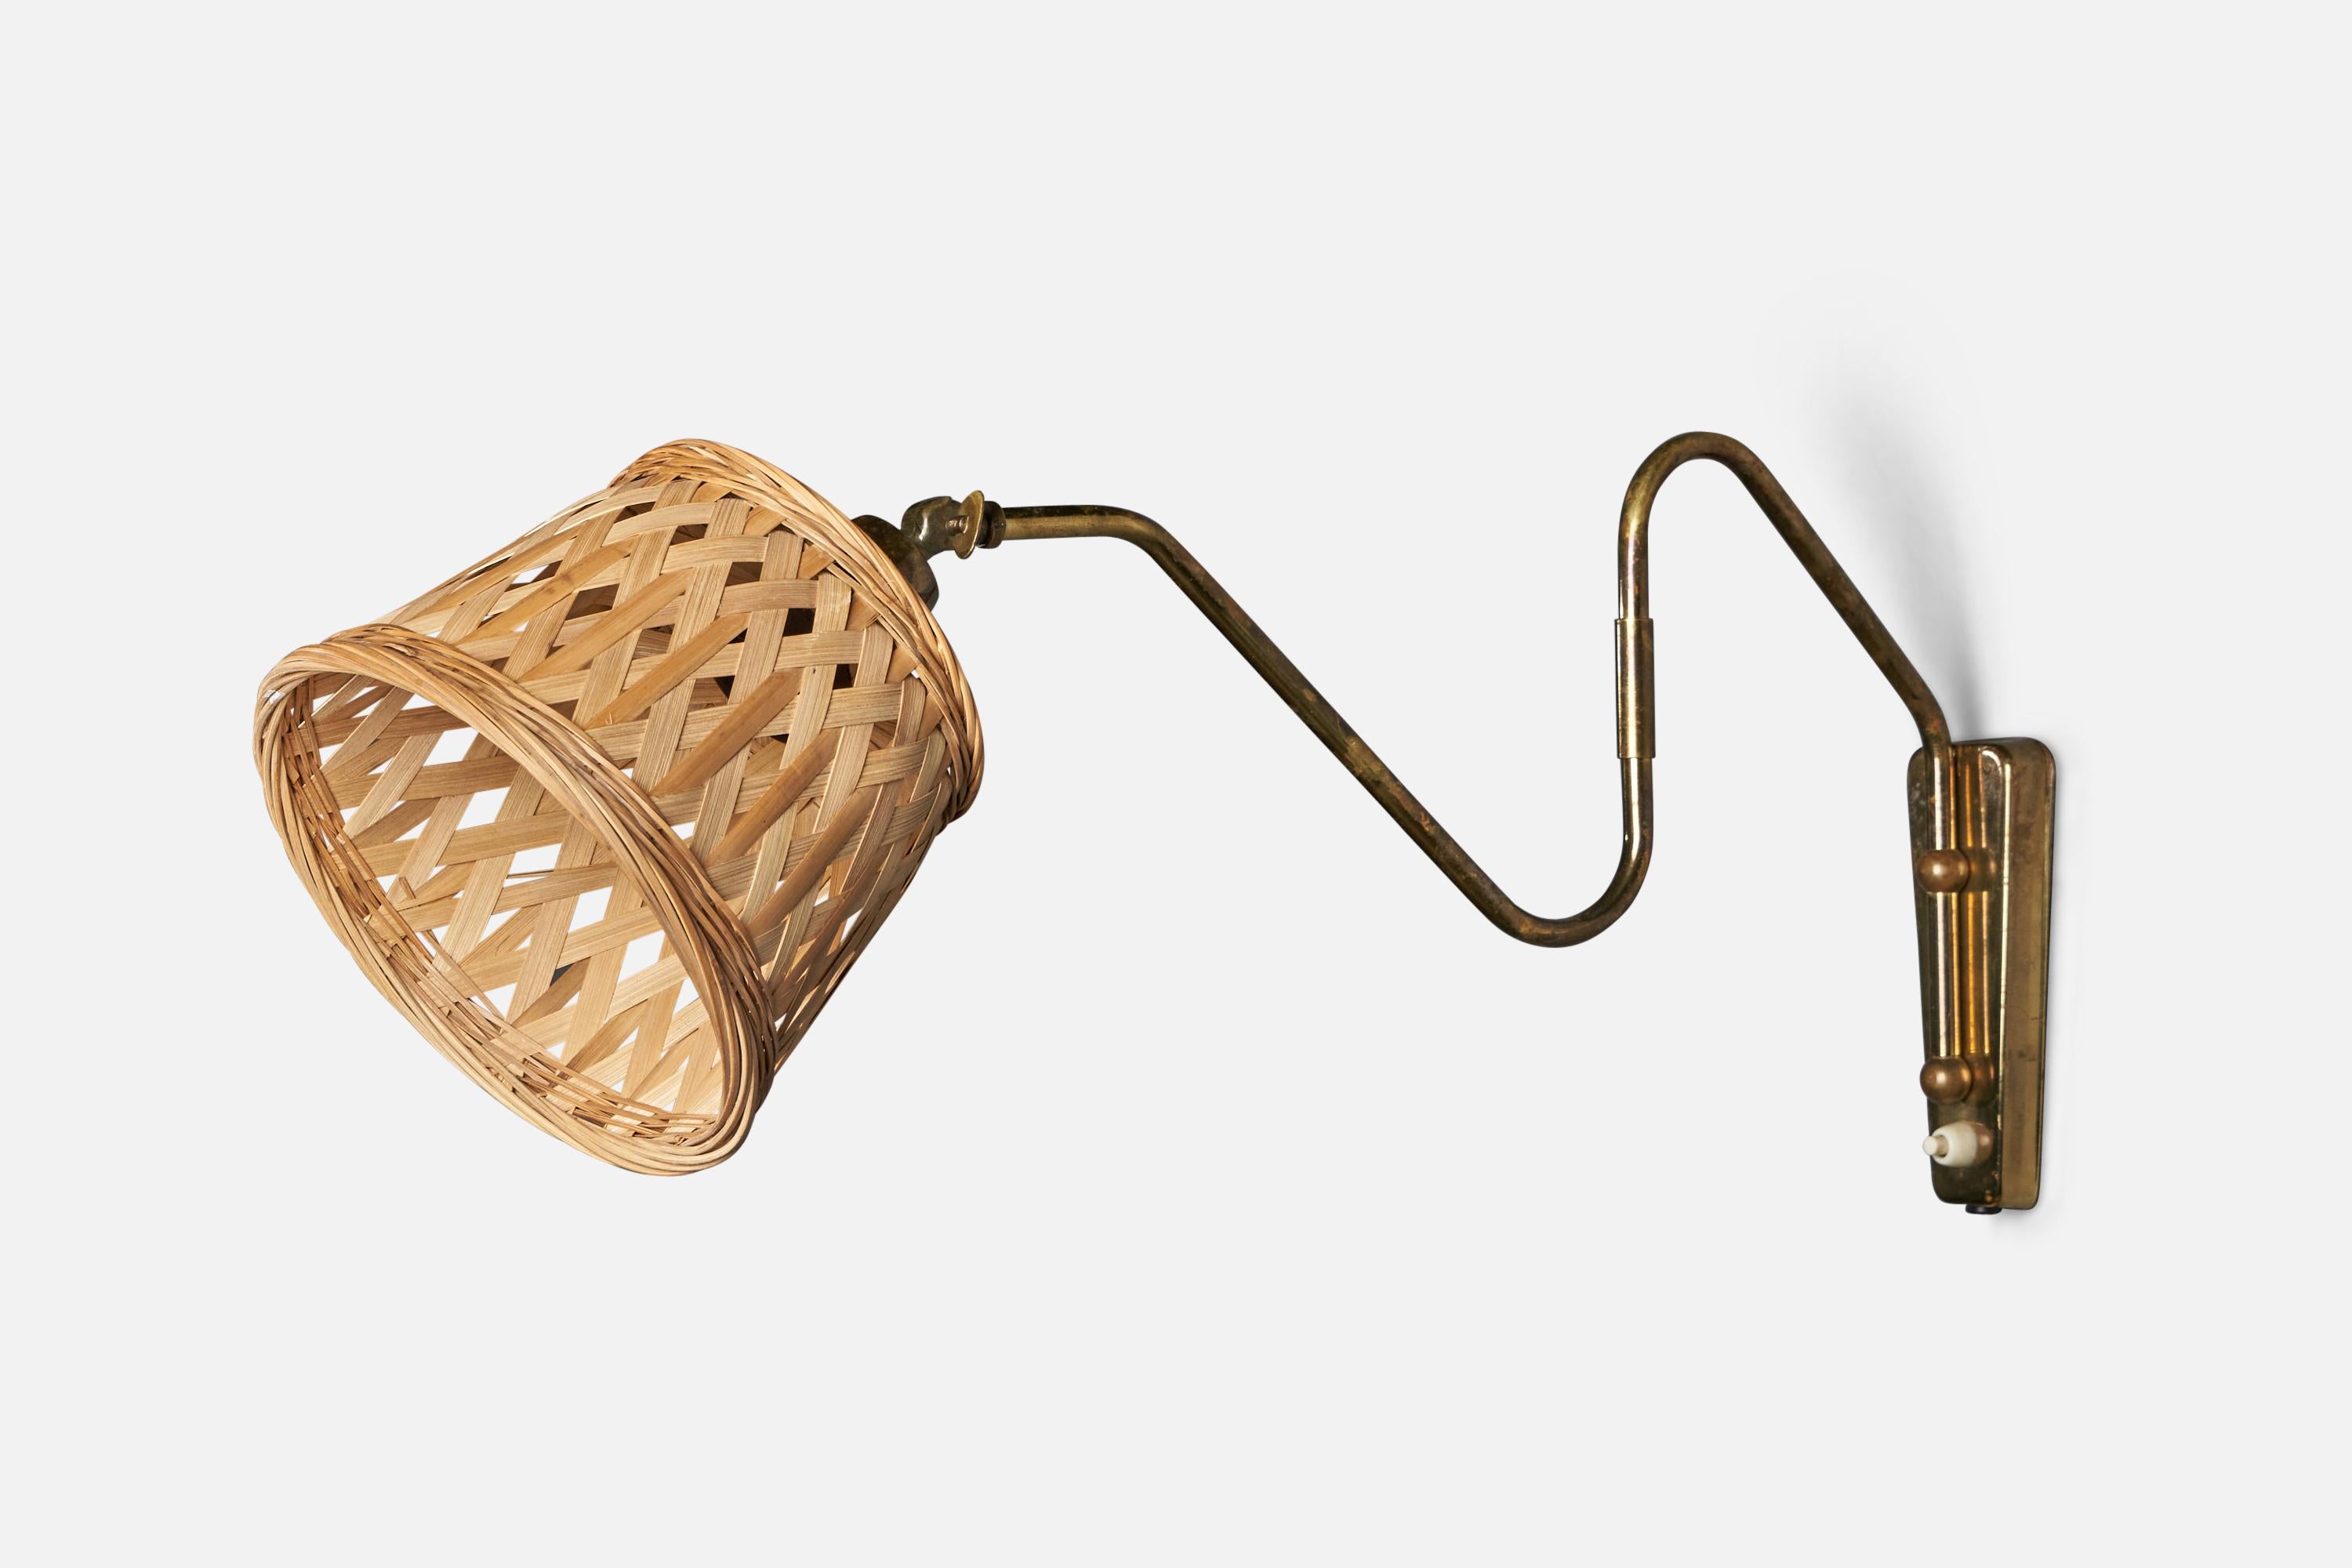 
An adjustable brass and rattan wall light designed and produced in Denmark, 1940s.
Collapsed Dimensions (inches): 10” H x 13.25” W x 7.5” D
Fully Extended Dimensions (inches): 10” H x 7” W x 20” D 
Back Plate Dimensions (inches): 6” H x 2.25” W x